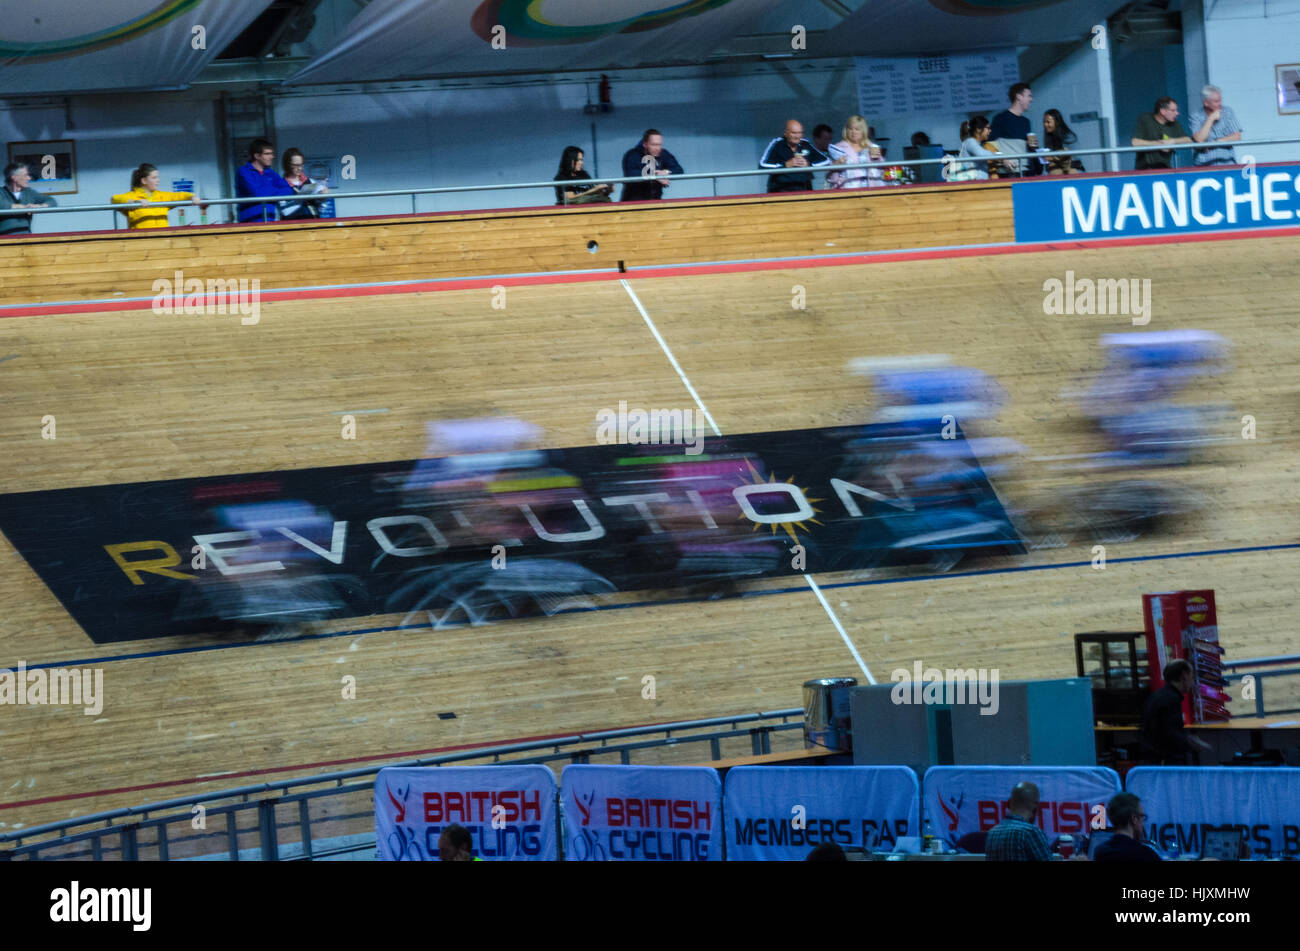 A motion blur of cyclists as they race at the National Indoor Championships at Manchester's velodrome Stock Photo